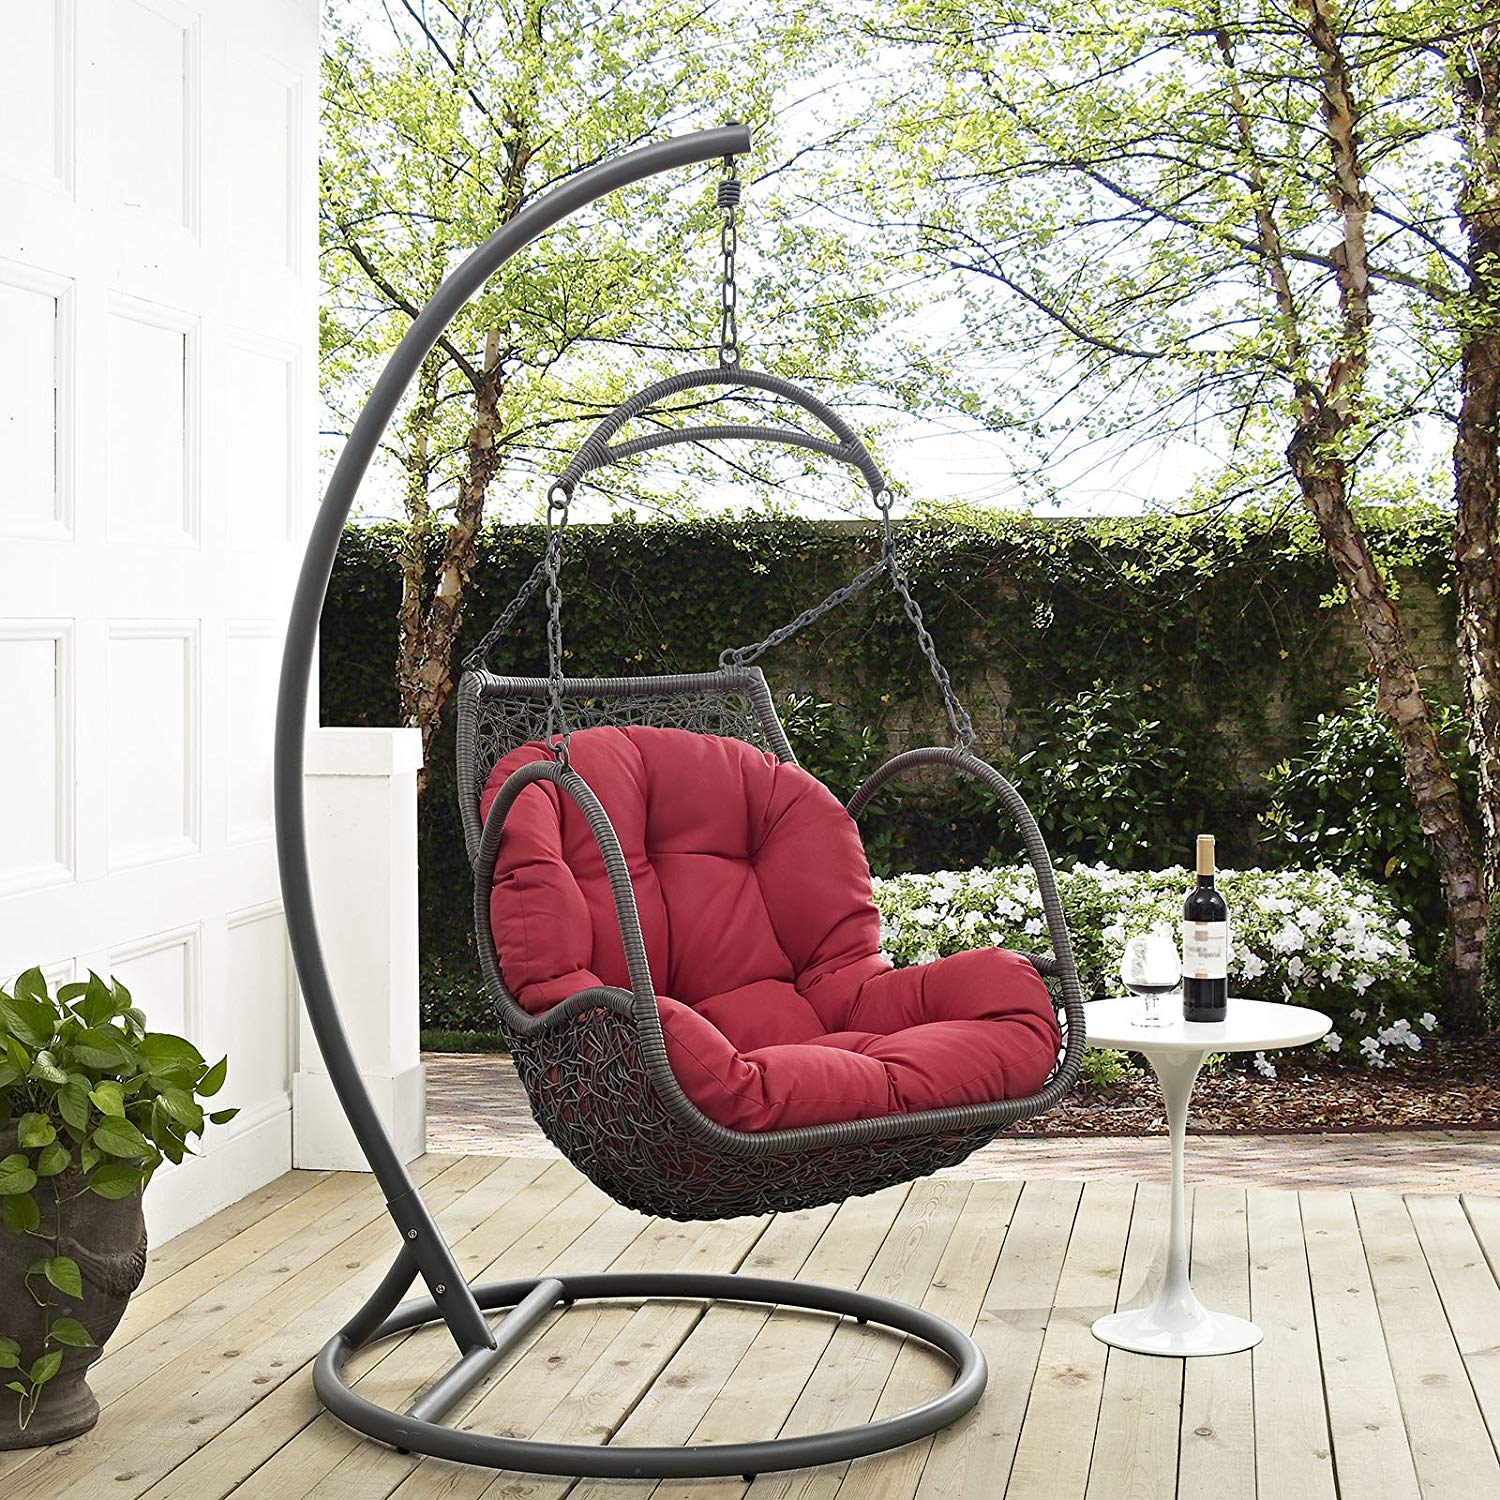 Top 10 Best Swinging Chairs in 2022 Reviews | Buyer's Guide